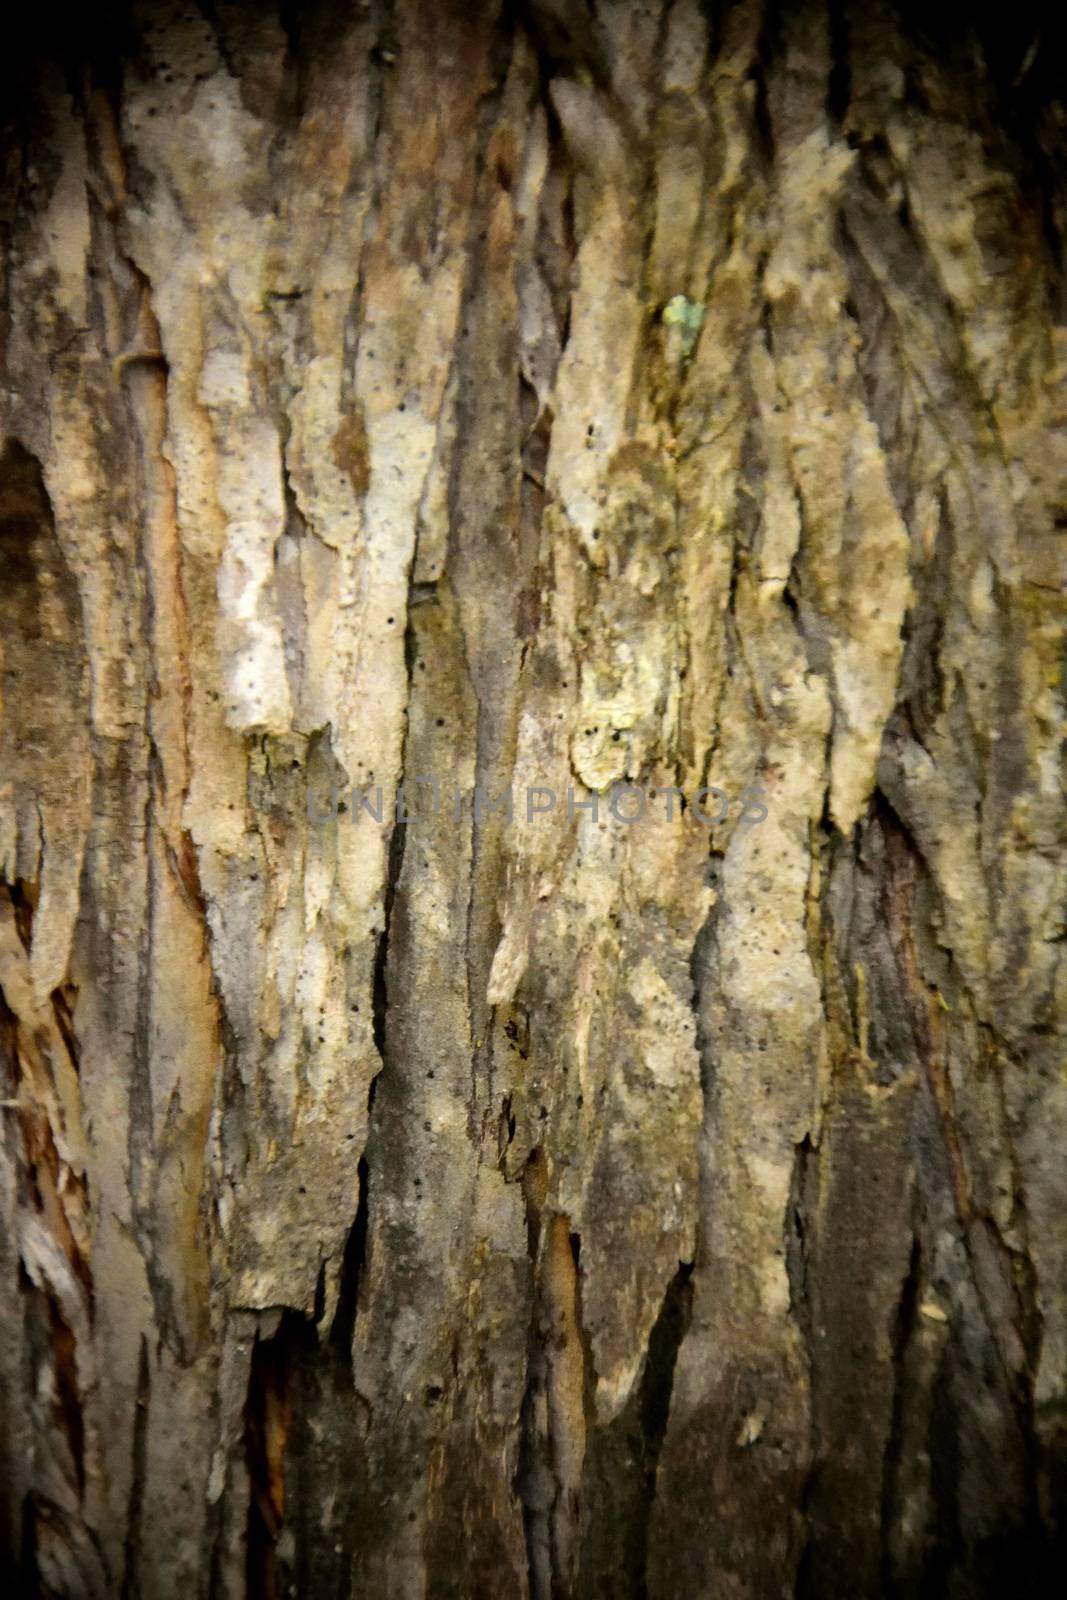 A close up of the trunk of an Australian native Paperbark tree